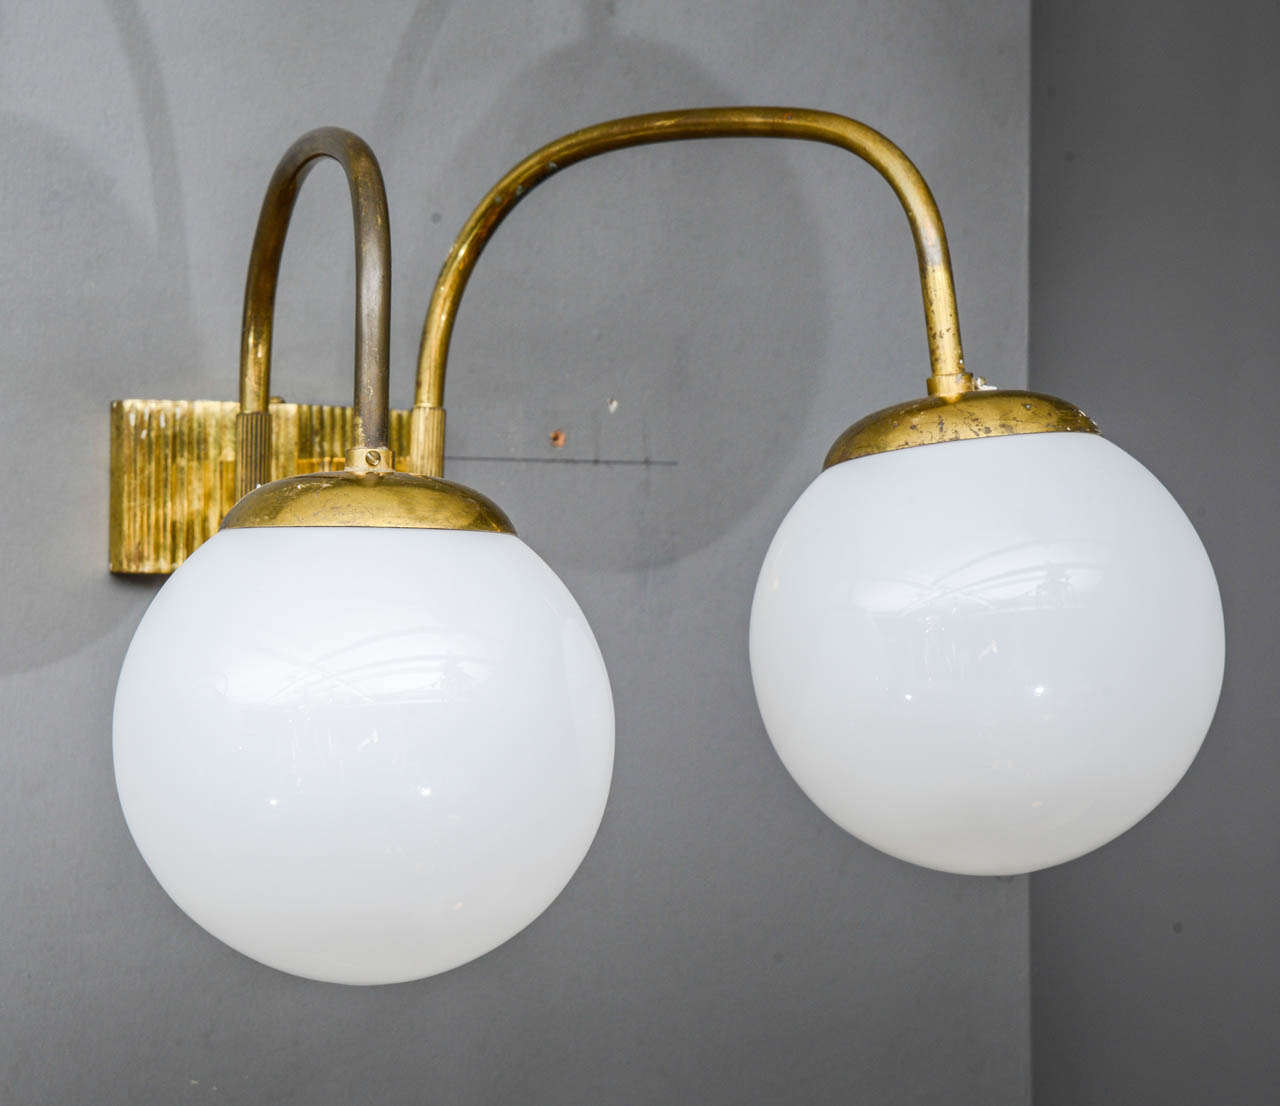 Set of six wall sconces made of brass with two glass globes.
This kind of wall sconces used to be seen in old brasseries or bistros of Paris.

New electrification.